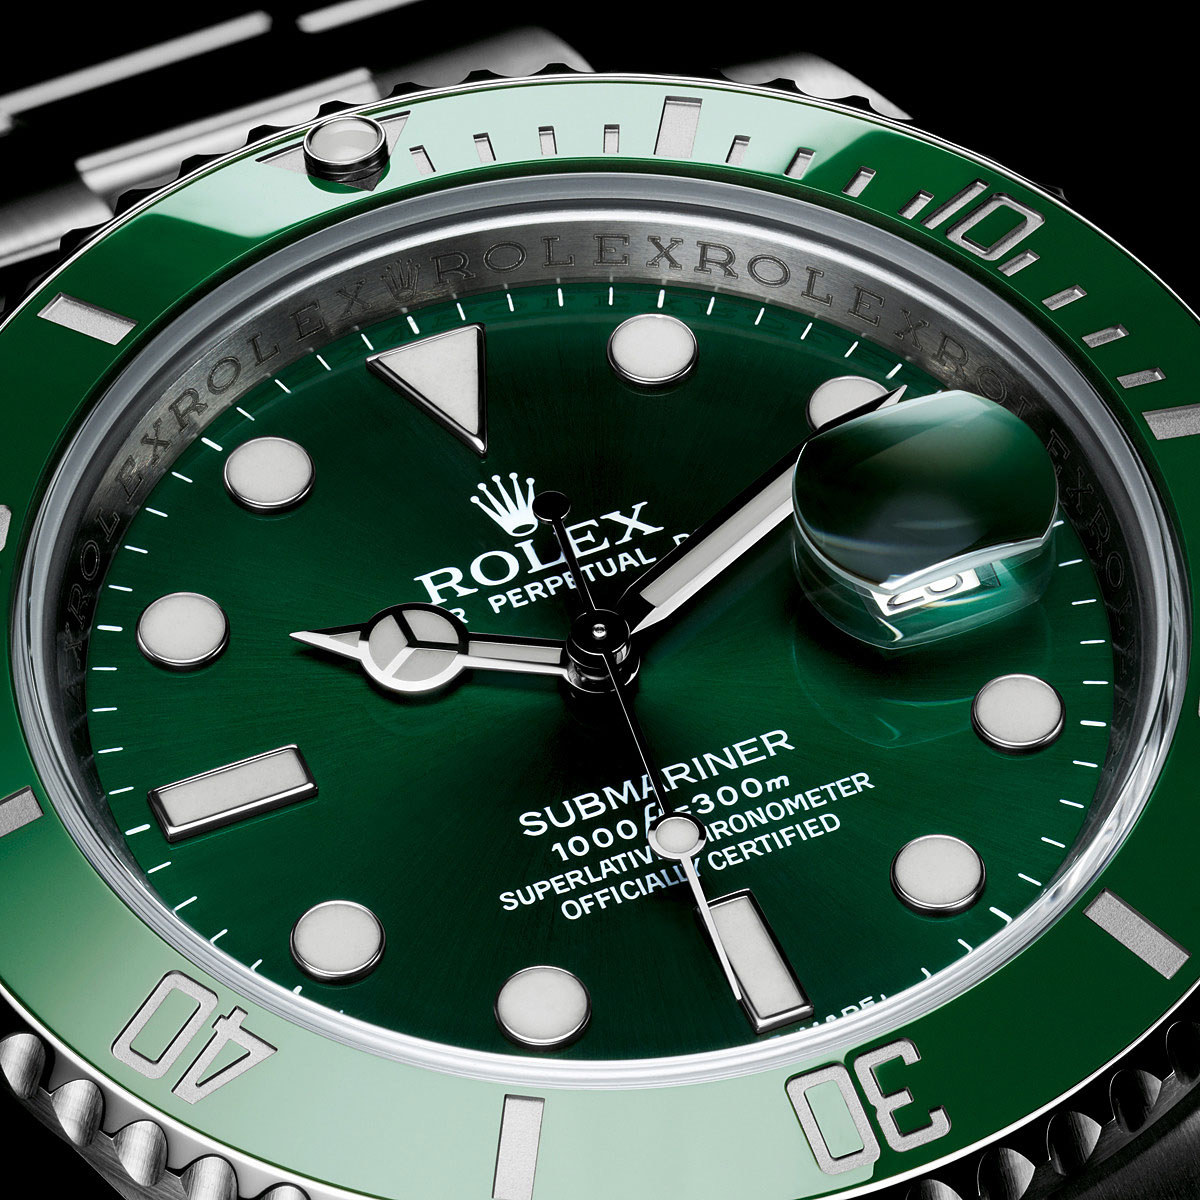 Rolex Submariner HULK is in stock and at a premium price